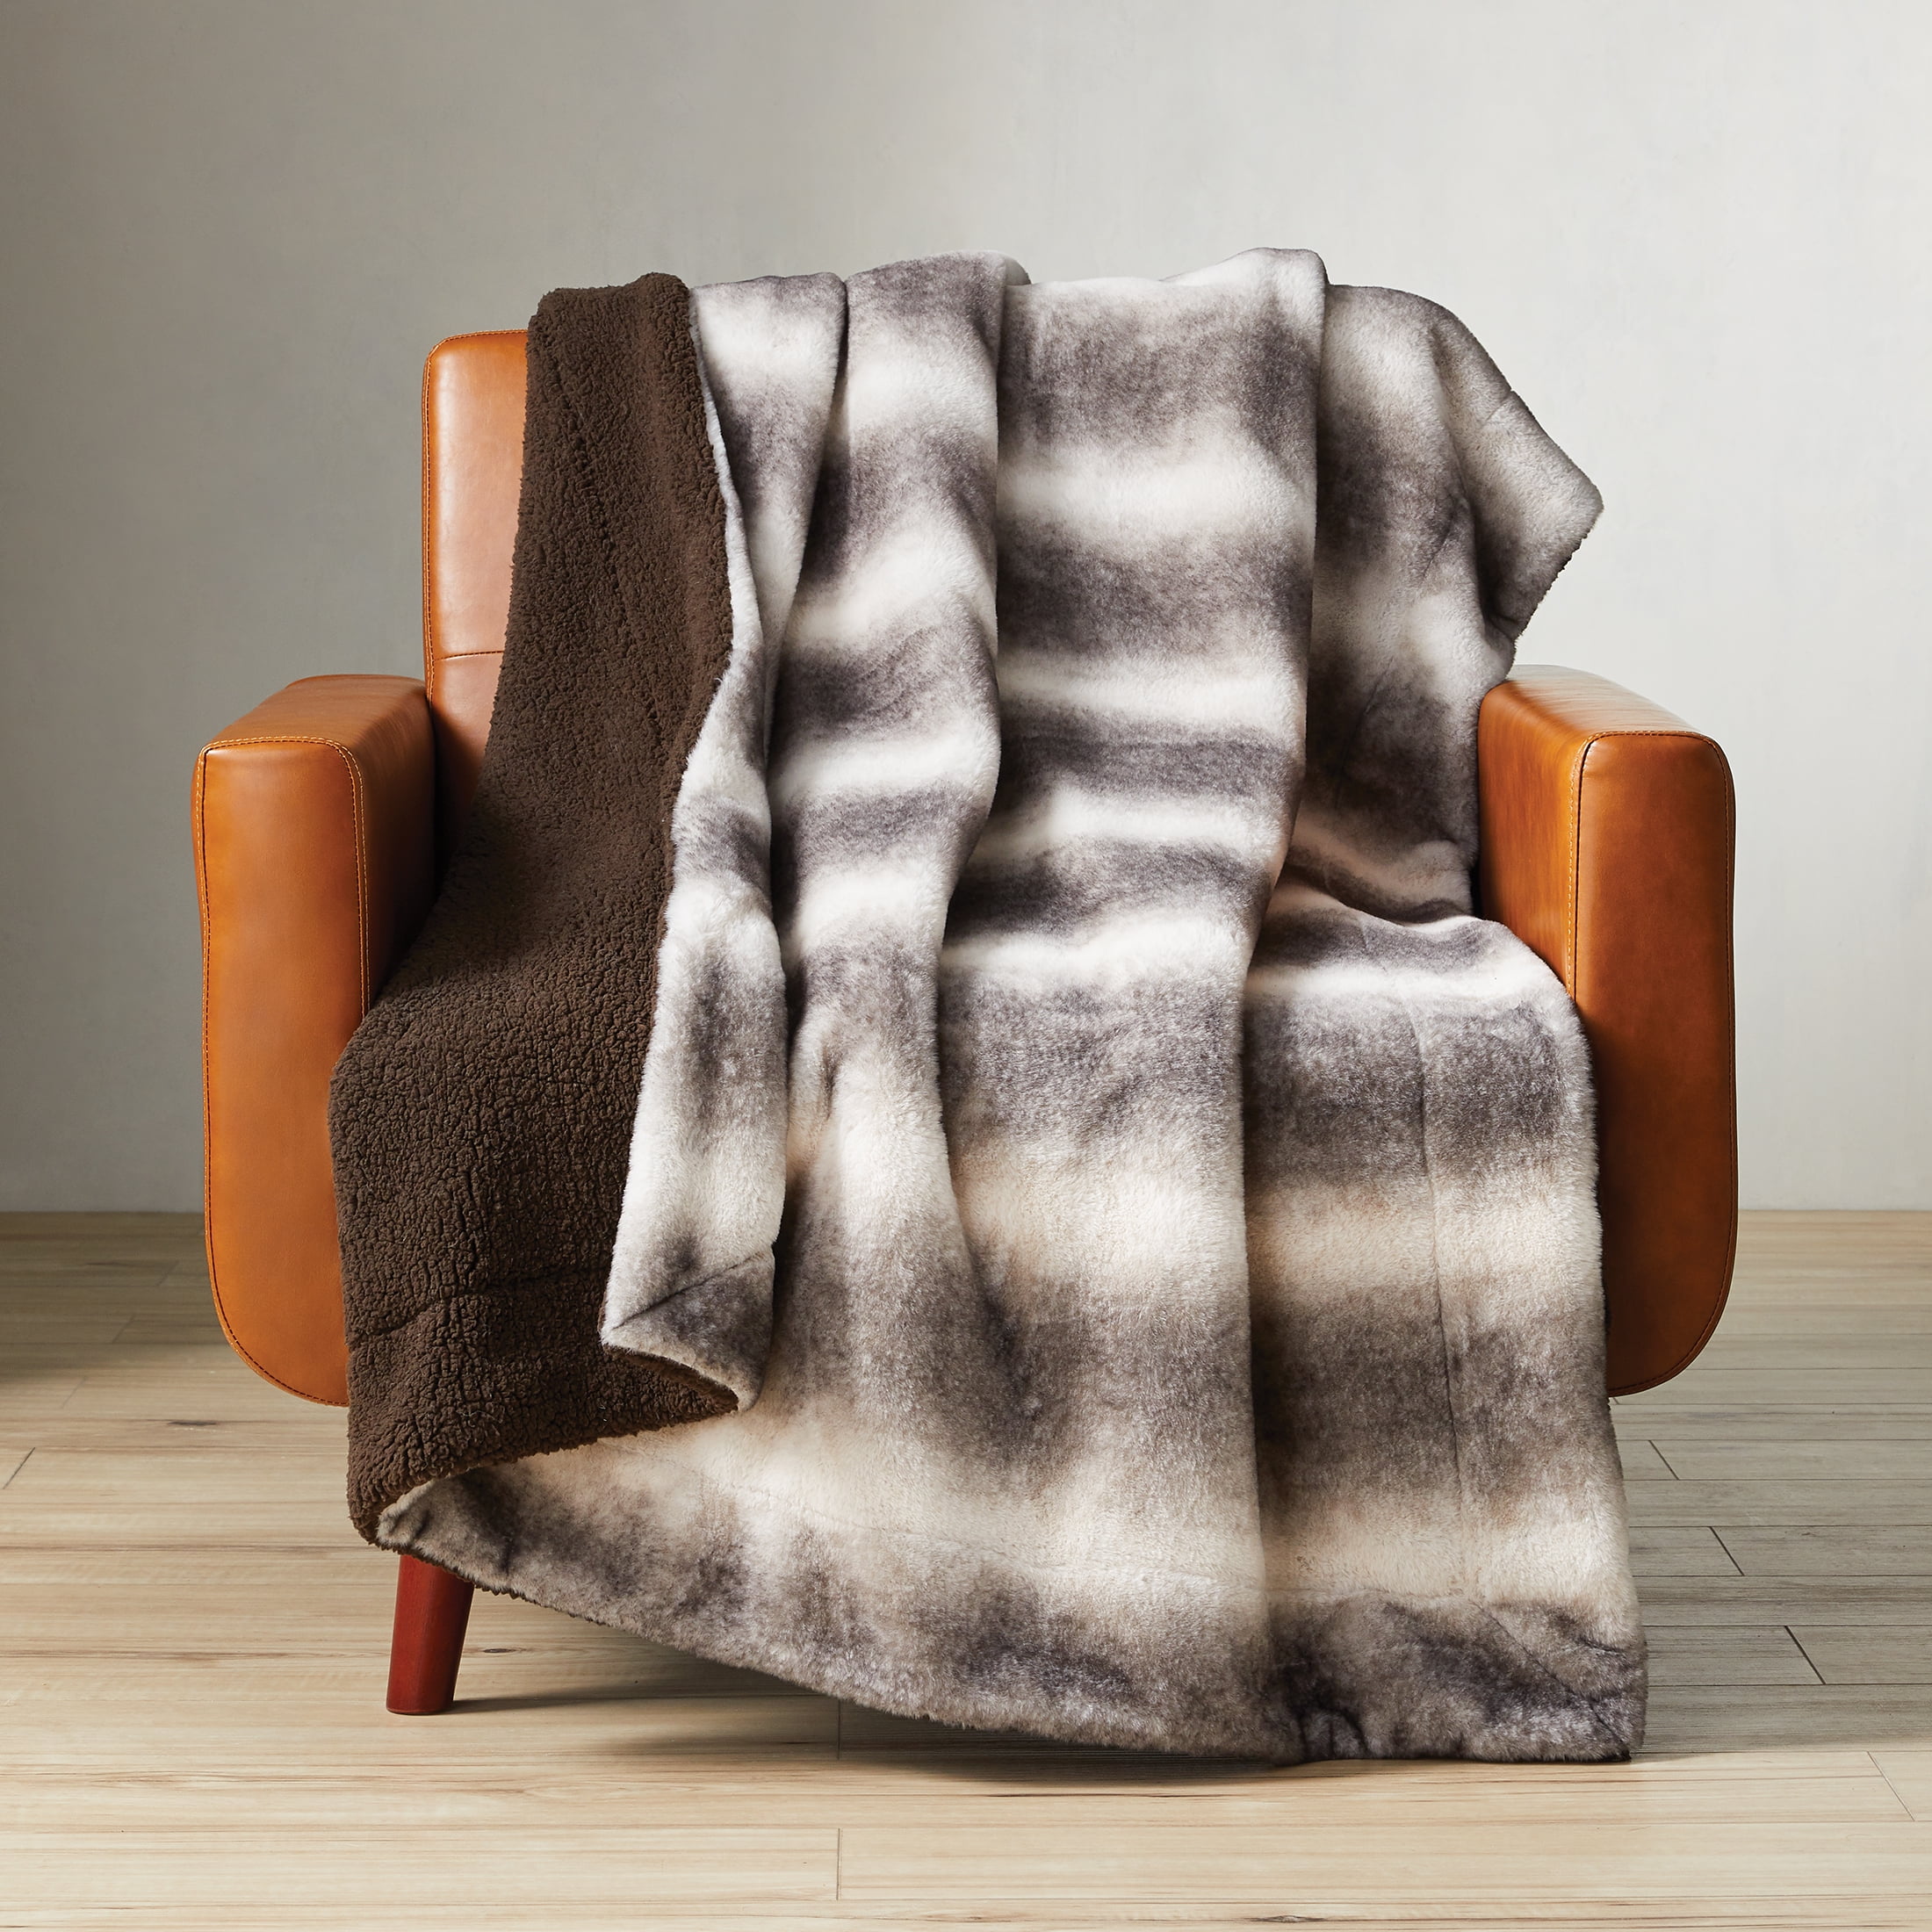 Better Homes & Gardens Faux Fur & Sherpa Throw Blanket (Wolf Brown or Greys) $6.71 + Free S&H w/ Walmart+ or $35+